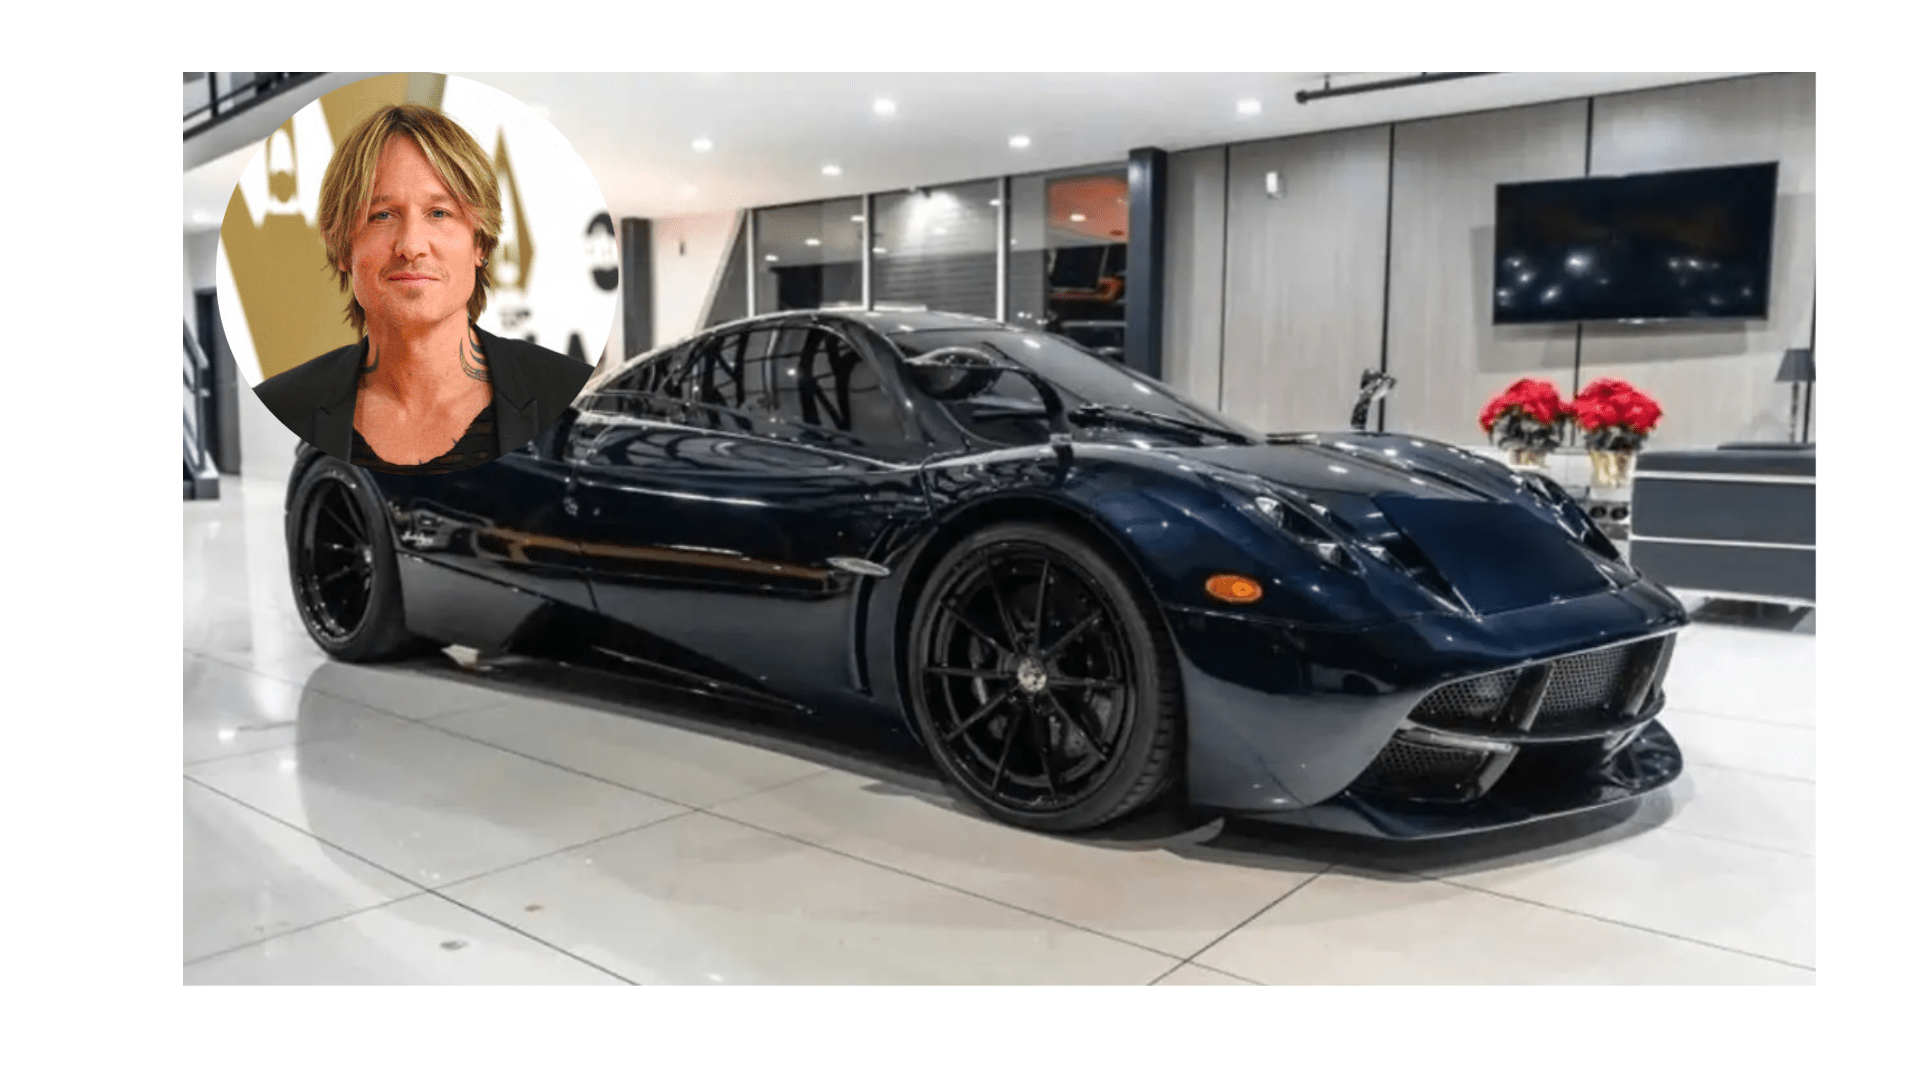 Keith Urban's Car Is Up For Sale – But It'll Cost You – JJ | 101.3 KFDI